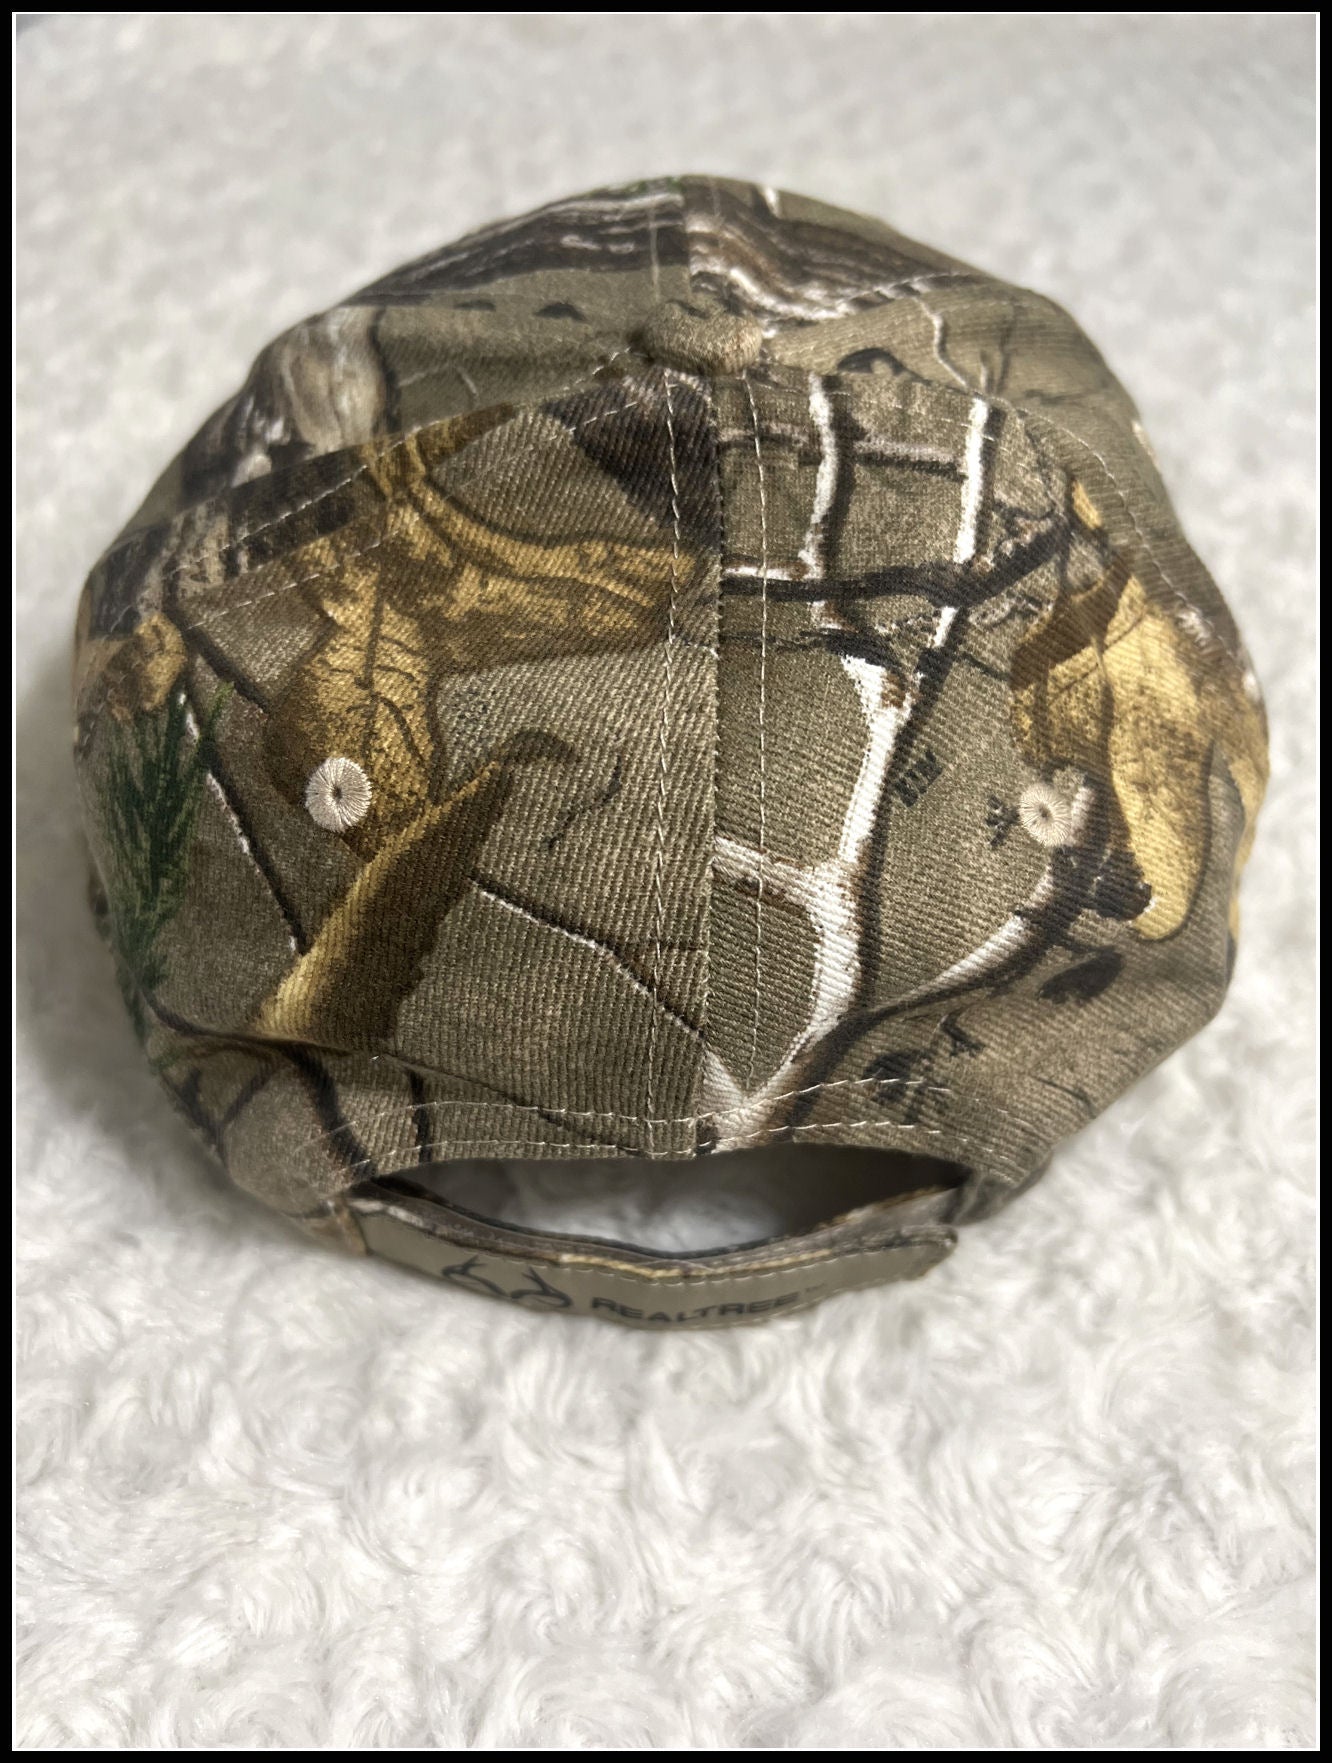 Real Tree Hunters Camo and Gold CPO Hat